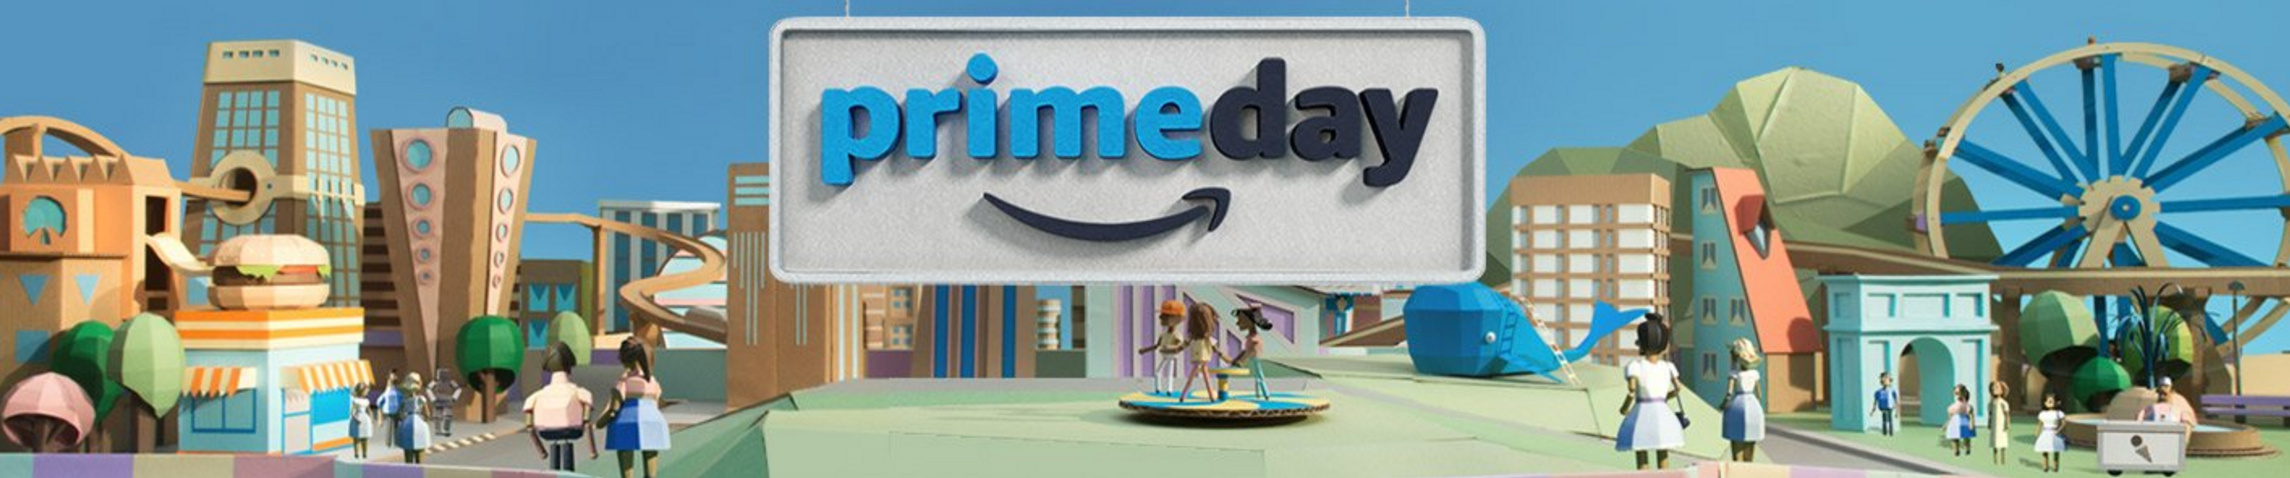 Amazon Prime Day Kicks Off With Deals, Problems Actually Buying Those Deals